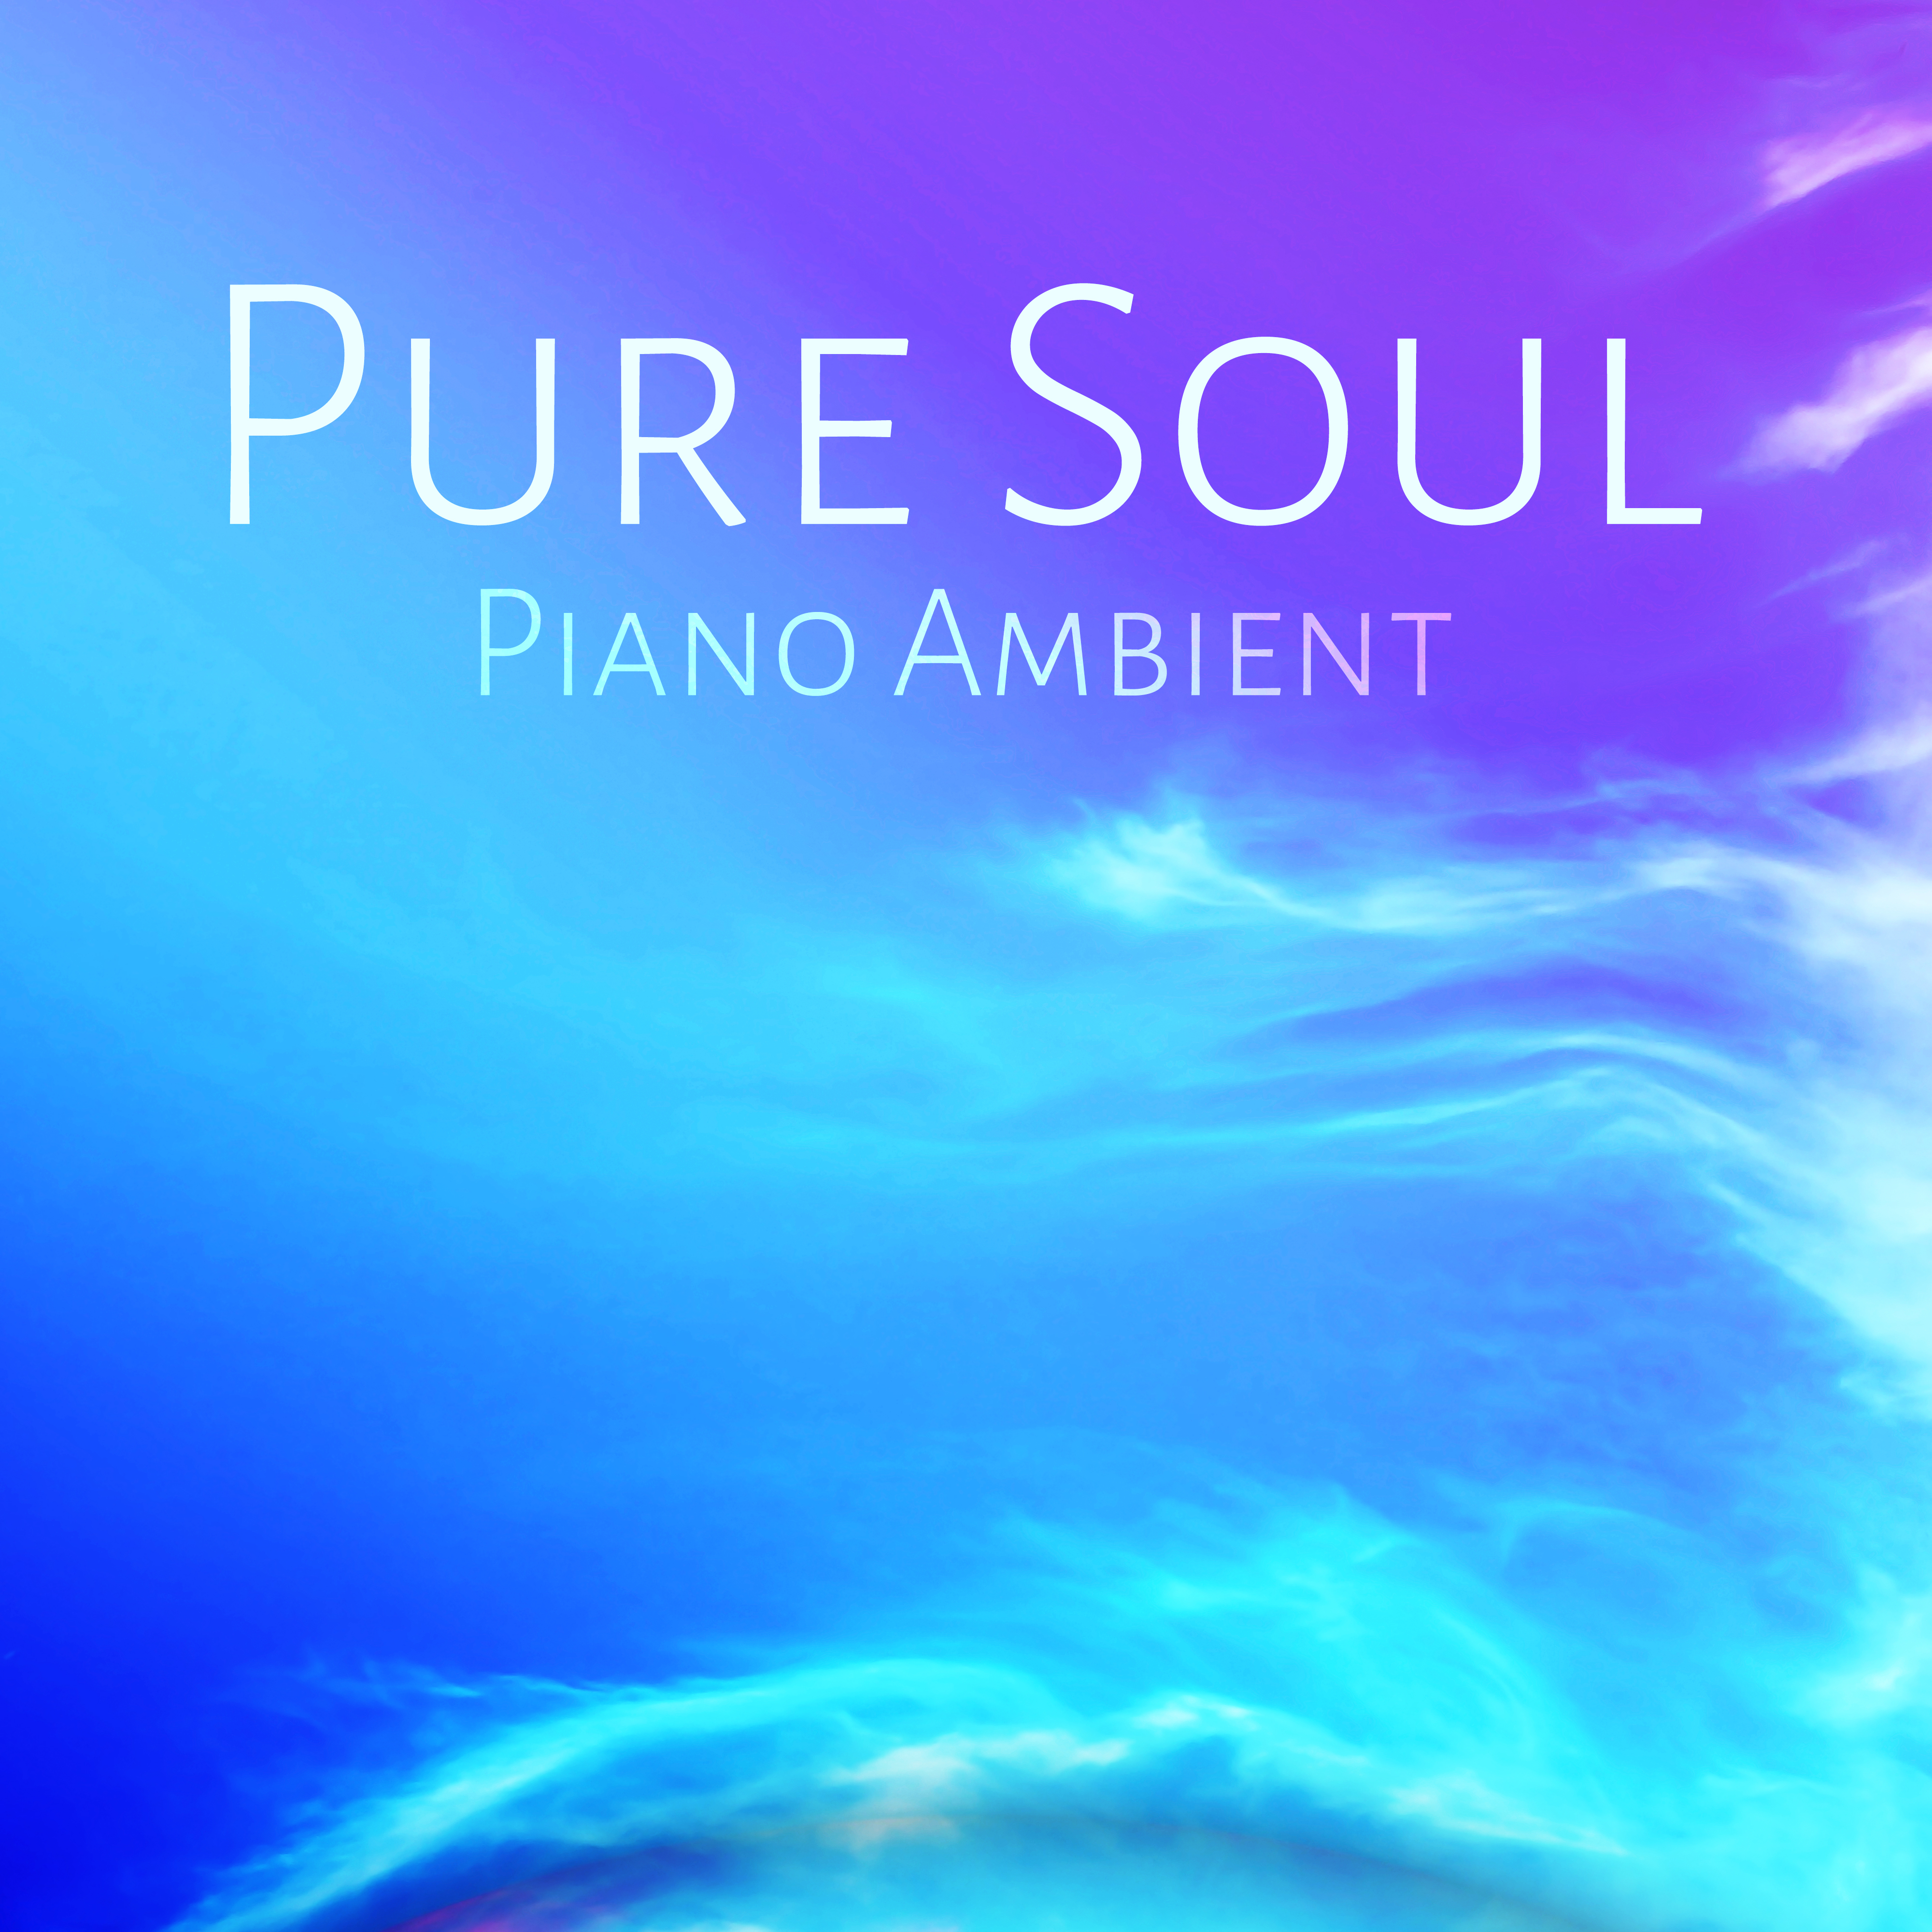 Pure Soul  Piano Ambient  Instrumental Piano Lounge, Spiritual Healing, Relaxation, Mind, Joy, Delight, Glee, Positive Thinking